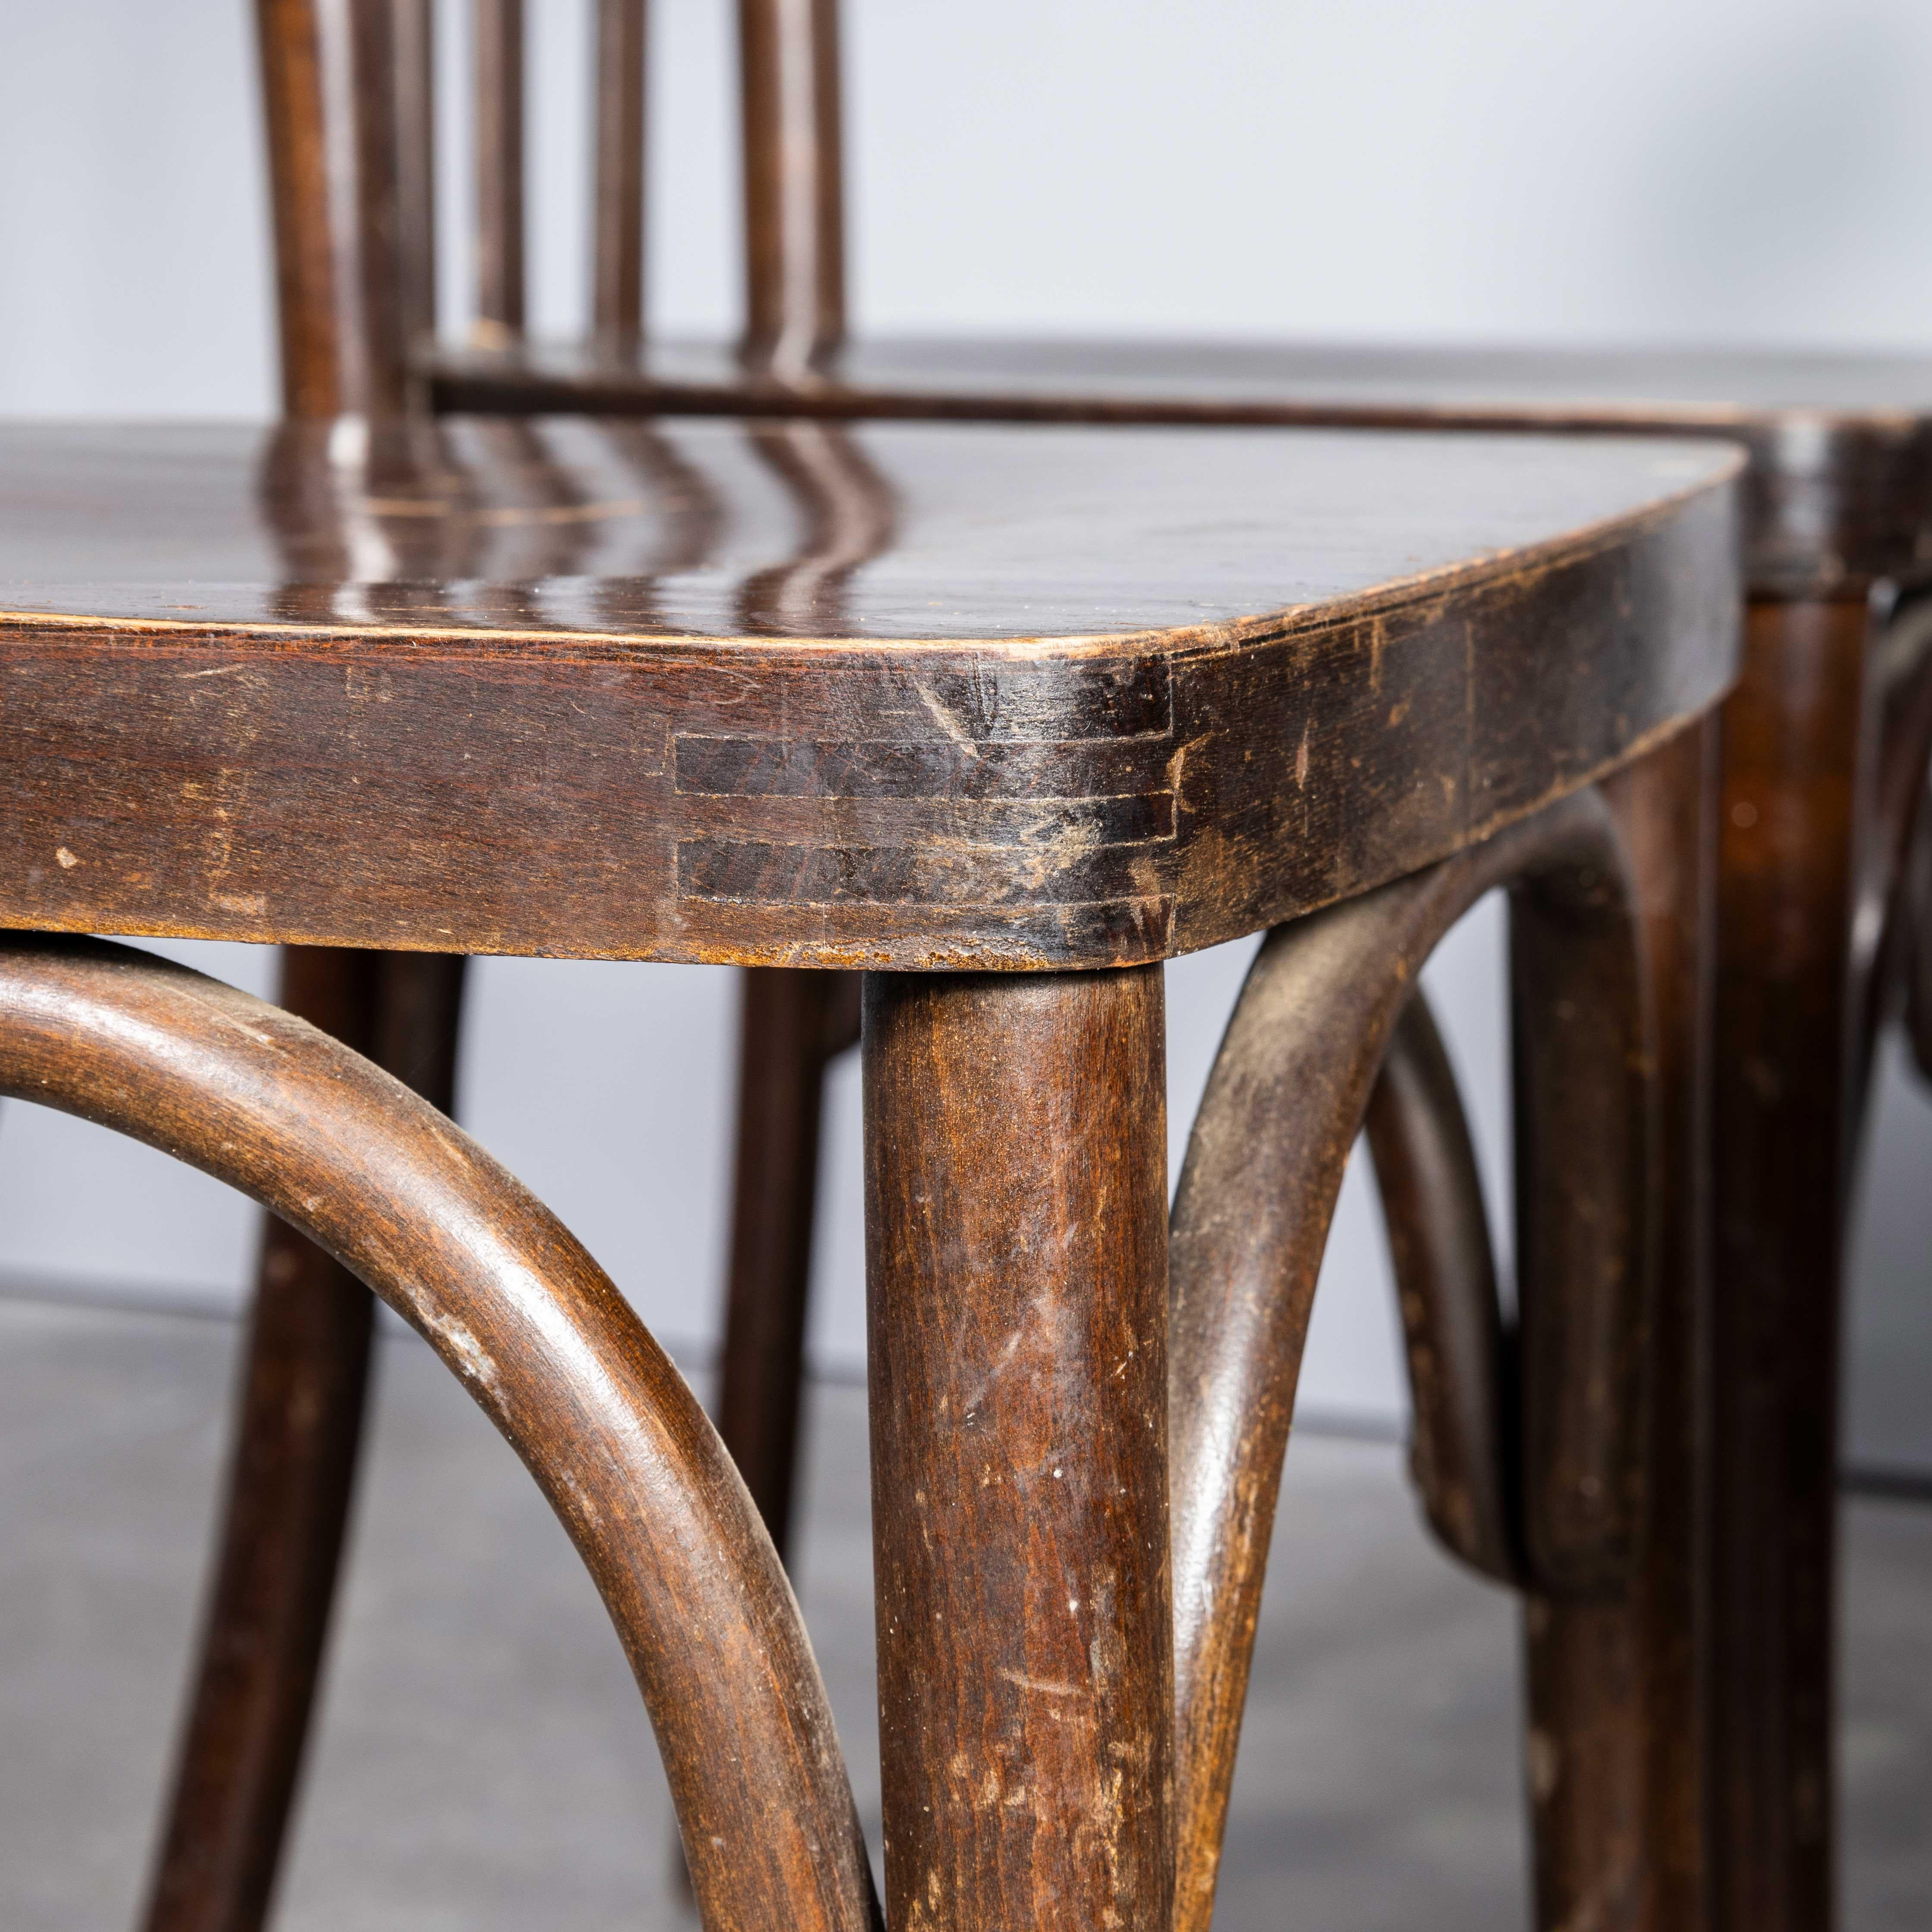 1940’s Bentwood Debrecen Classic Back Dining Chairs – Set Of Four
1940’s Bentwood Debrecen Classic Back Dining Chairs – Set Of Four. It is hard to be precise about the origin of these chairs as they are not labelled, but what we do know is at the